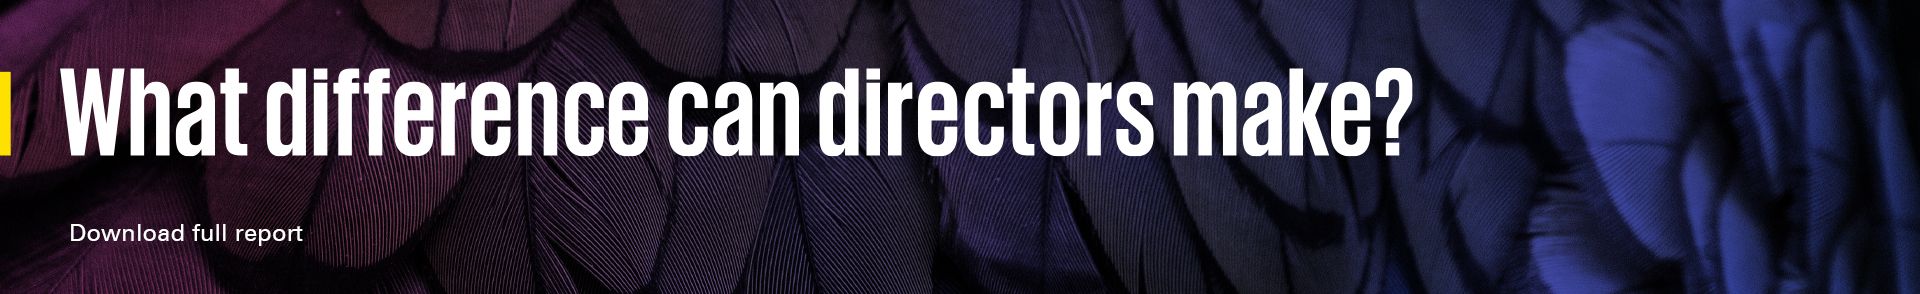 What difference can directors make?